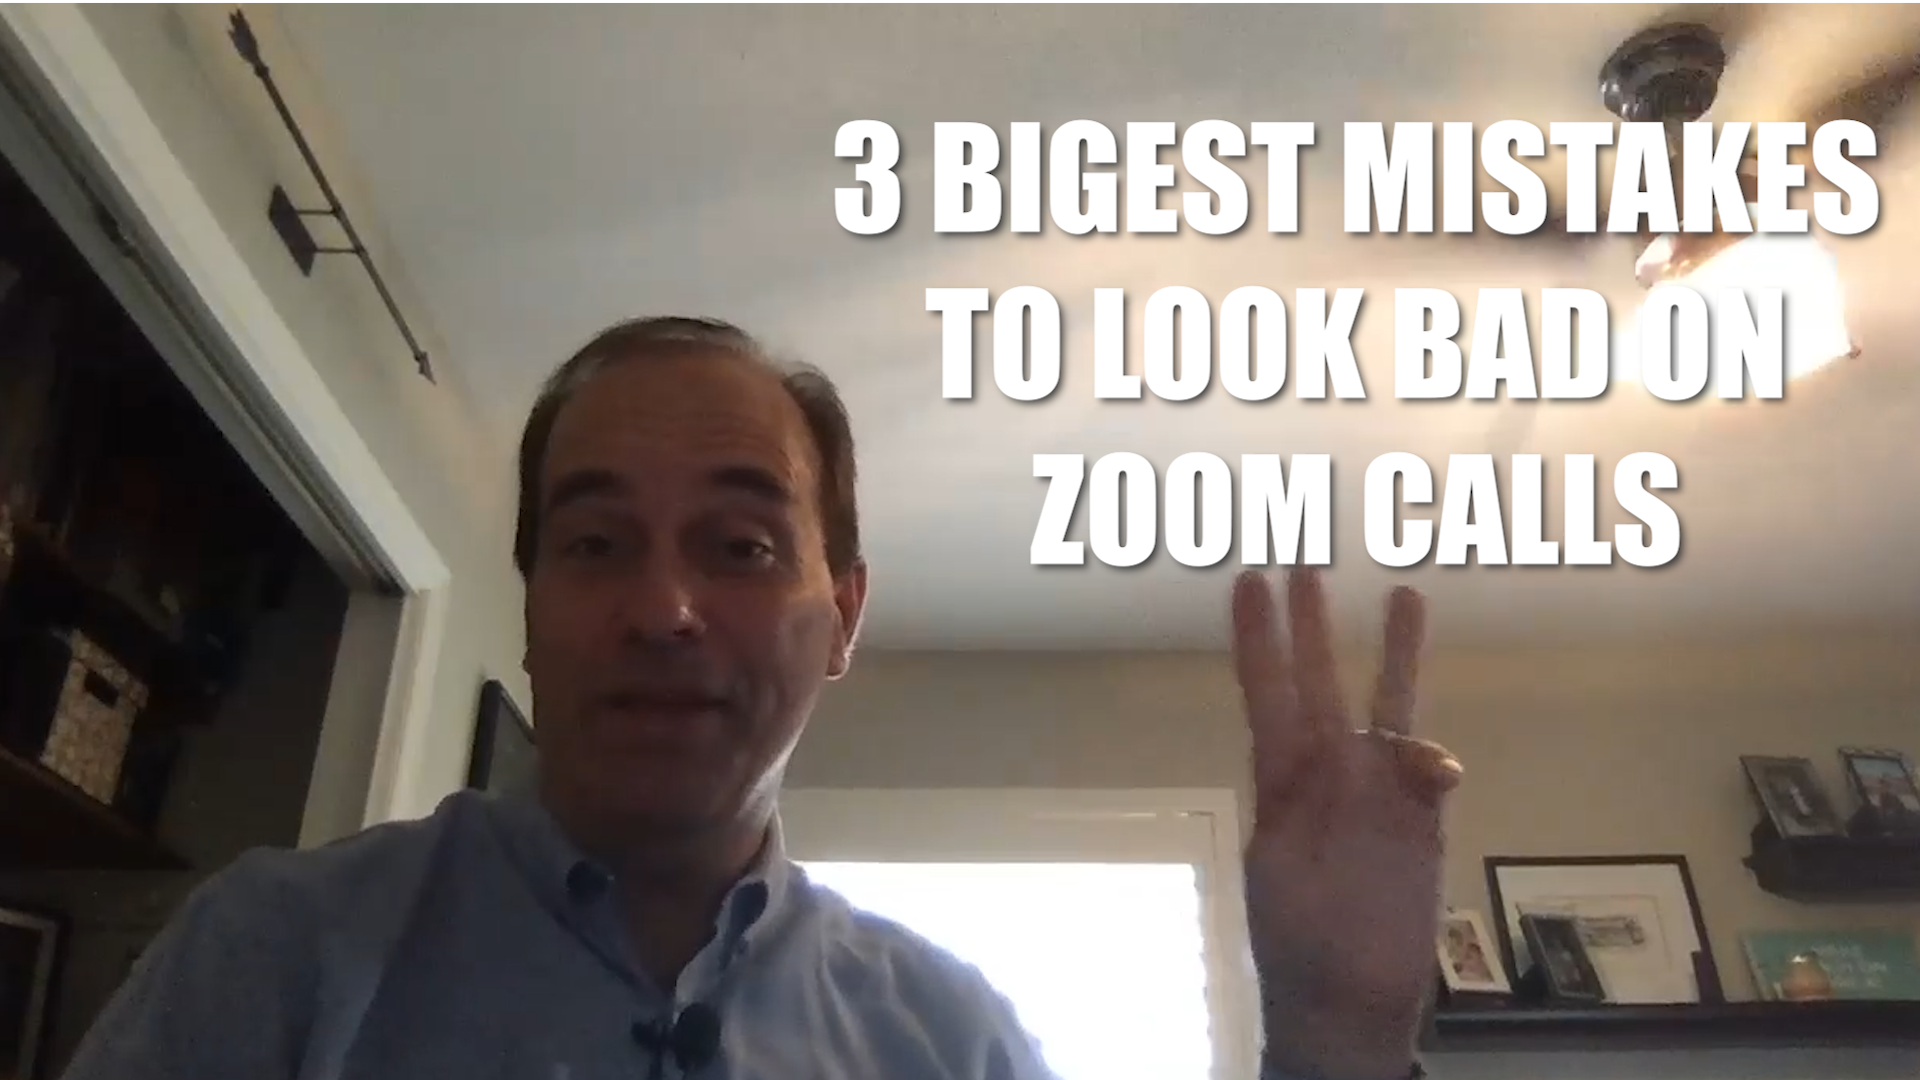 Video - The Three Biggest Mistakes That Make You Look Bad on Zoom Calls